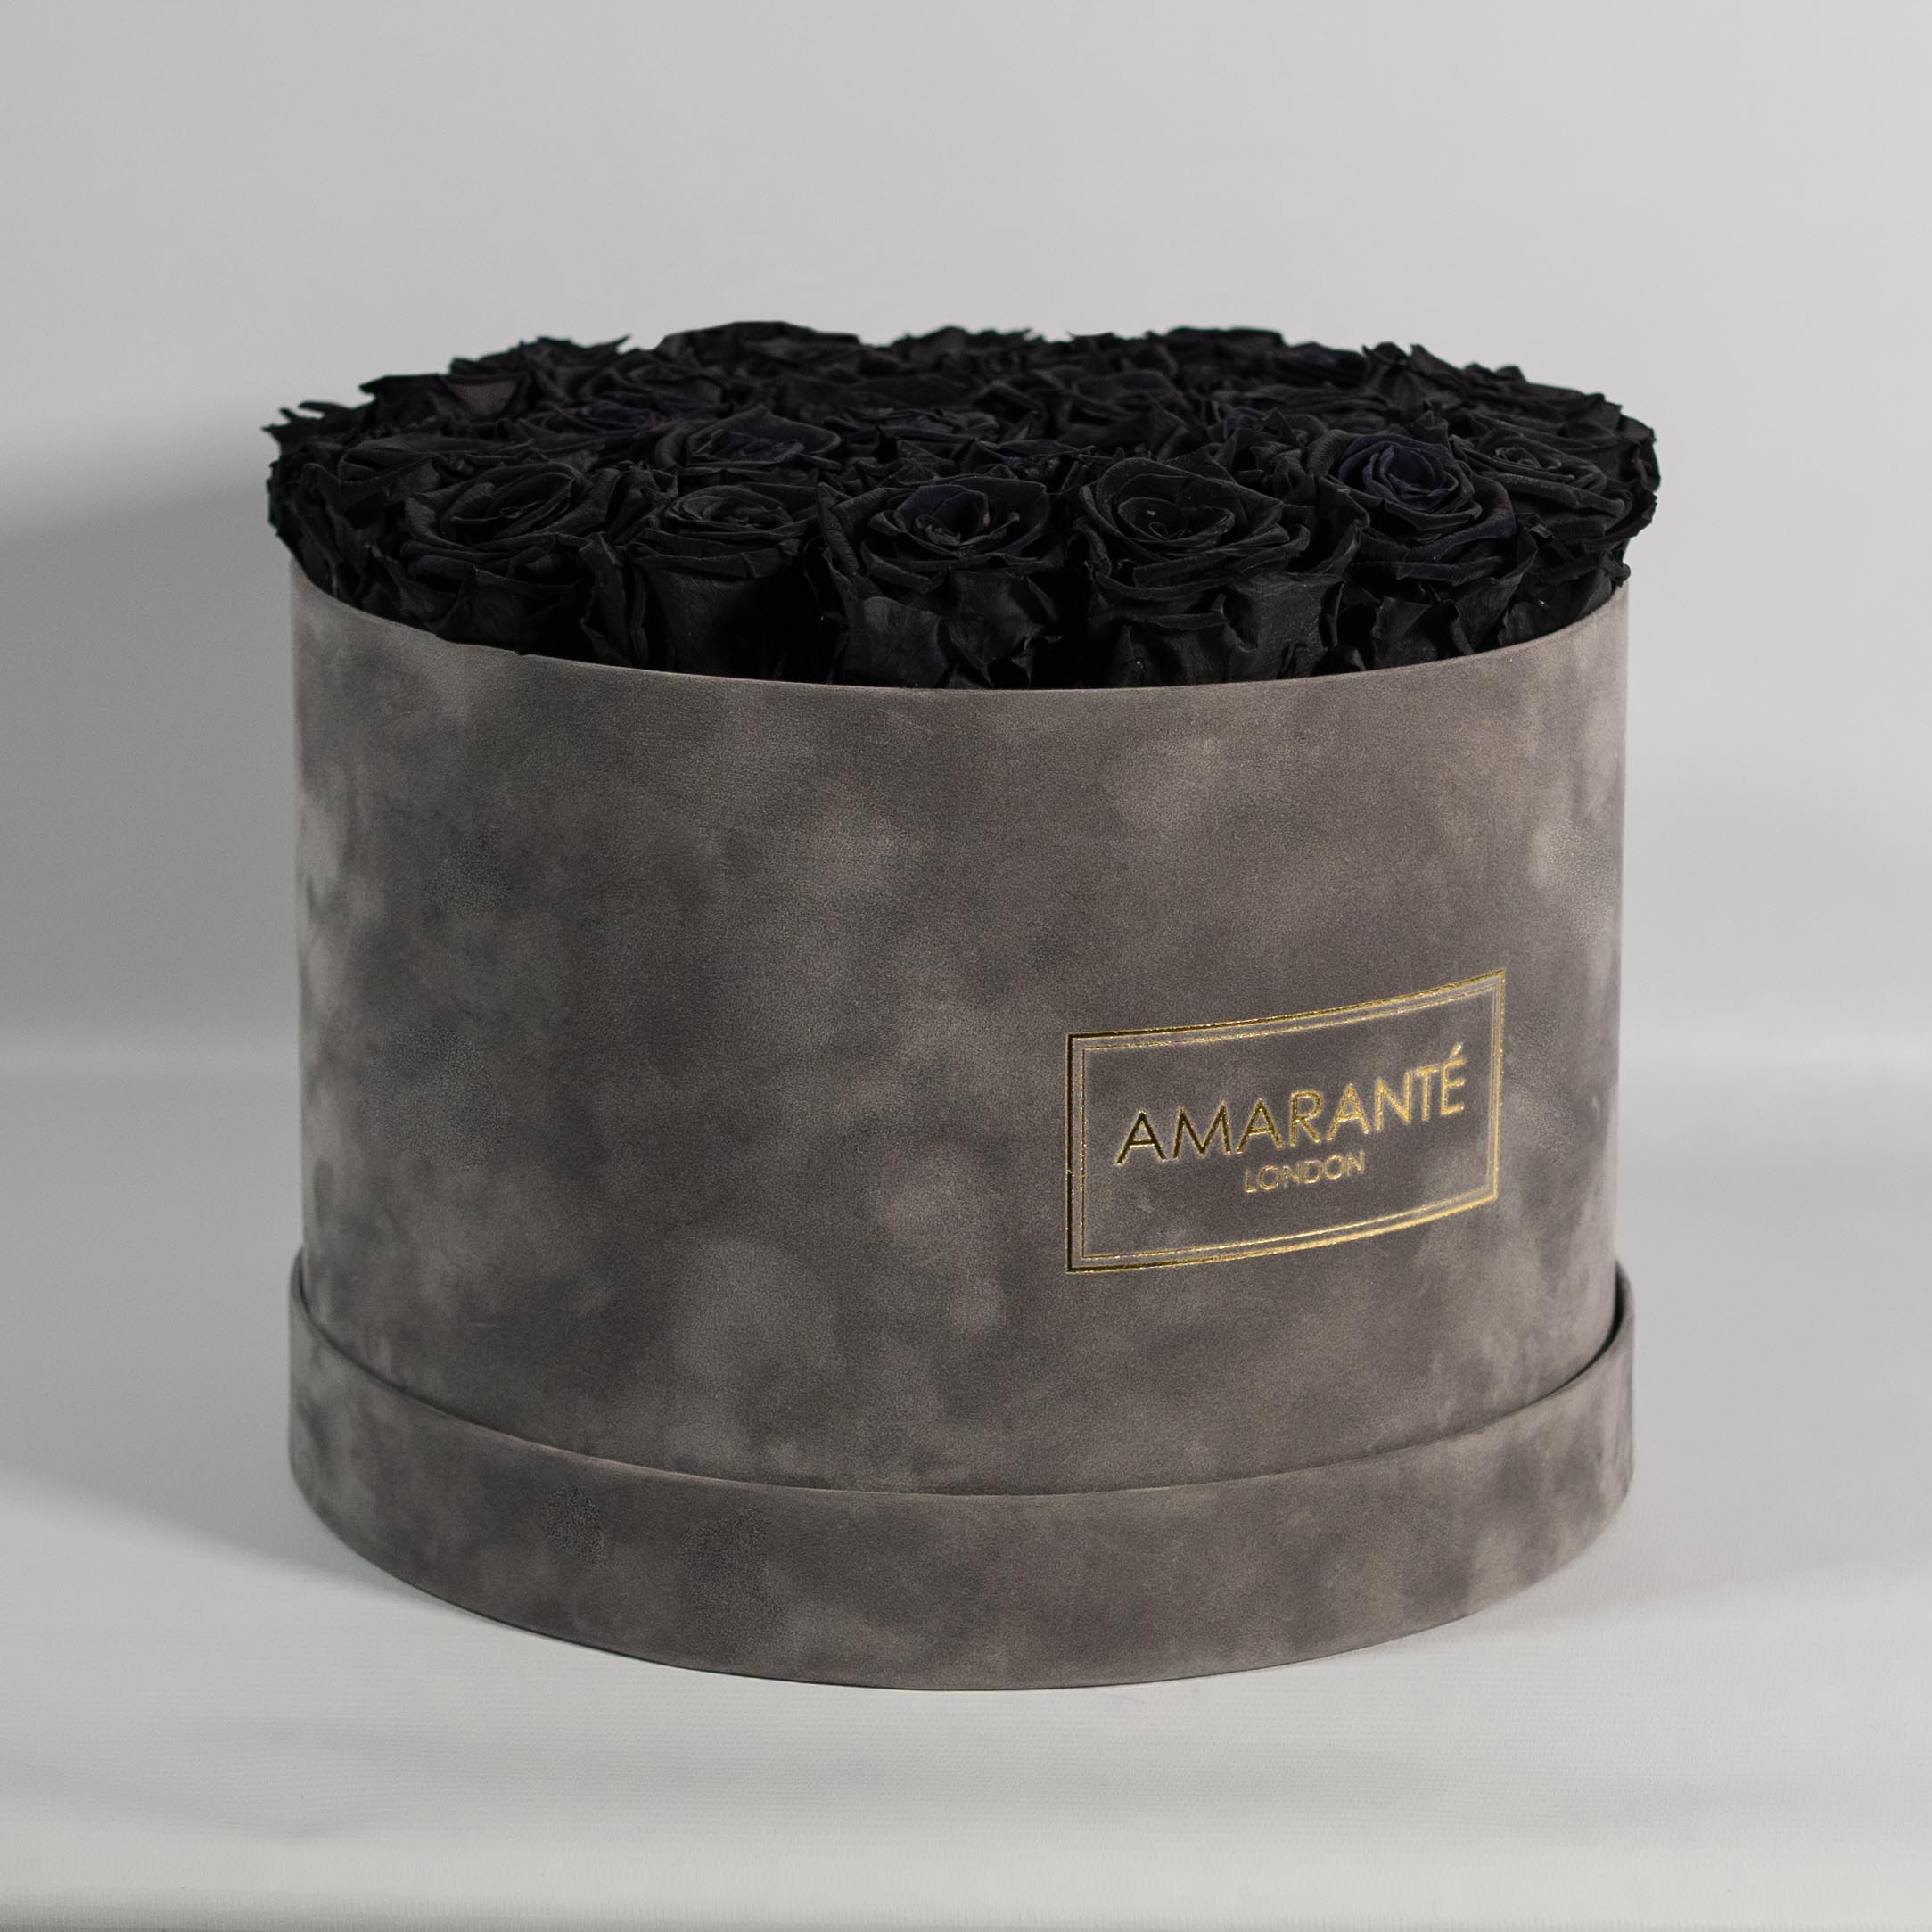 Dapper black Roses in a bold grey package.